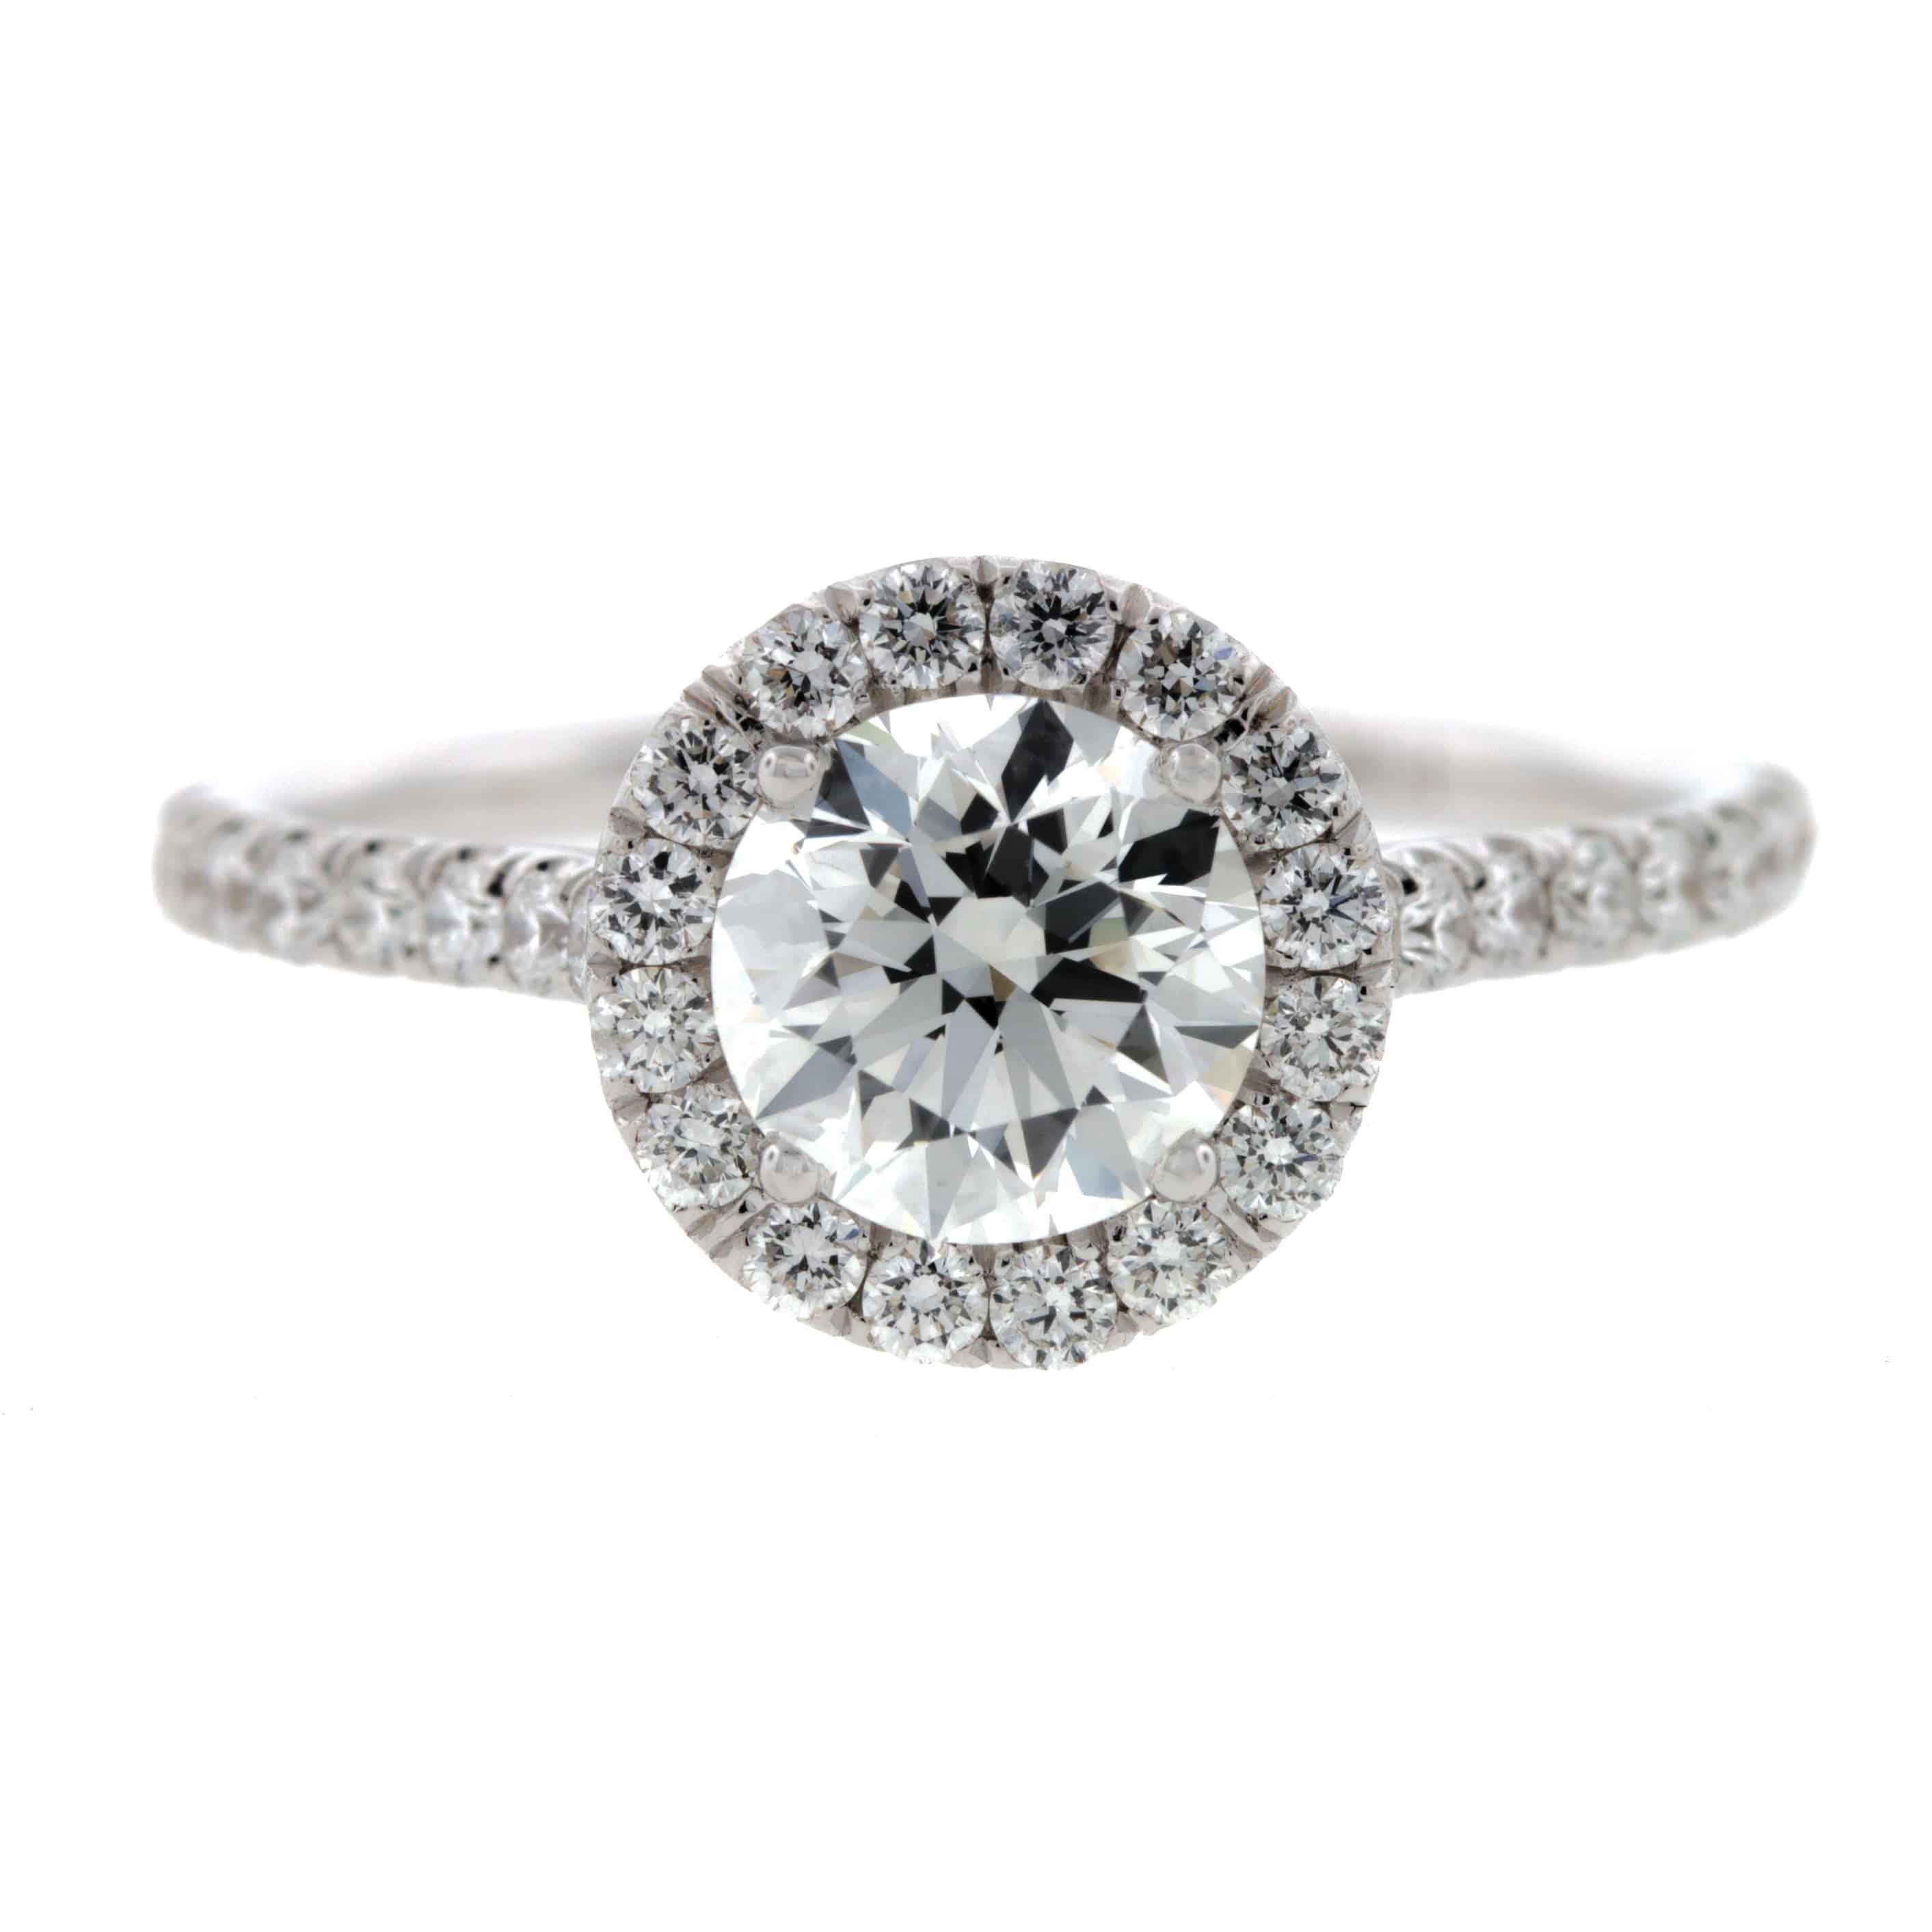 Built-In 'Cathedral' Round Diamond Engagement Ring with Diamond Pave For Sale